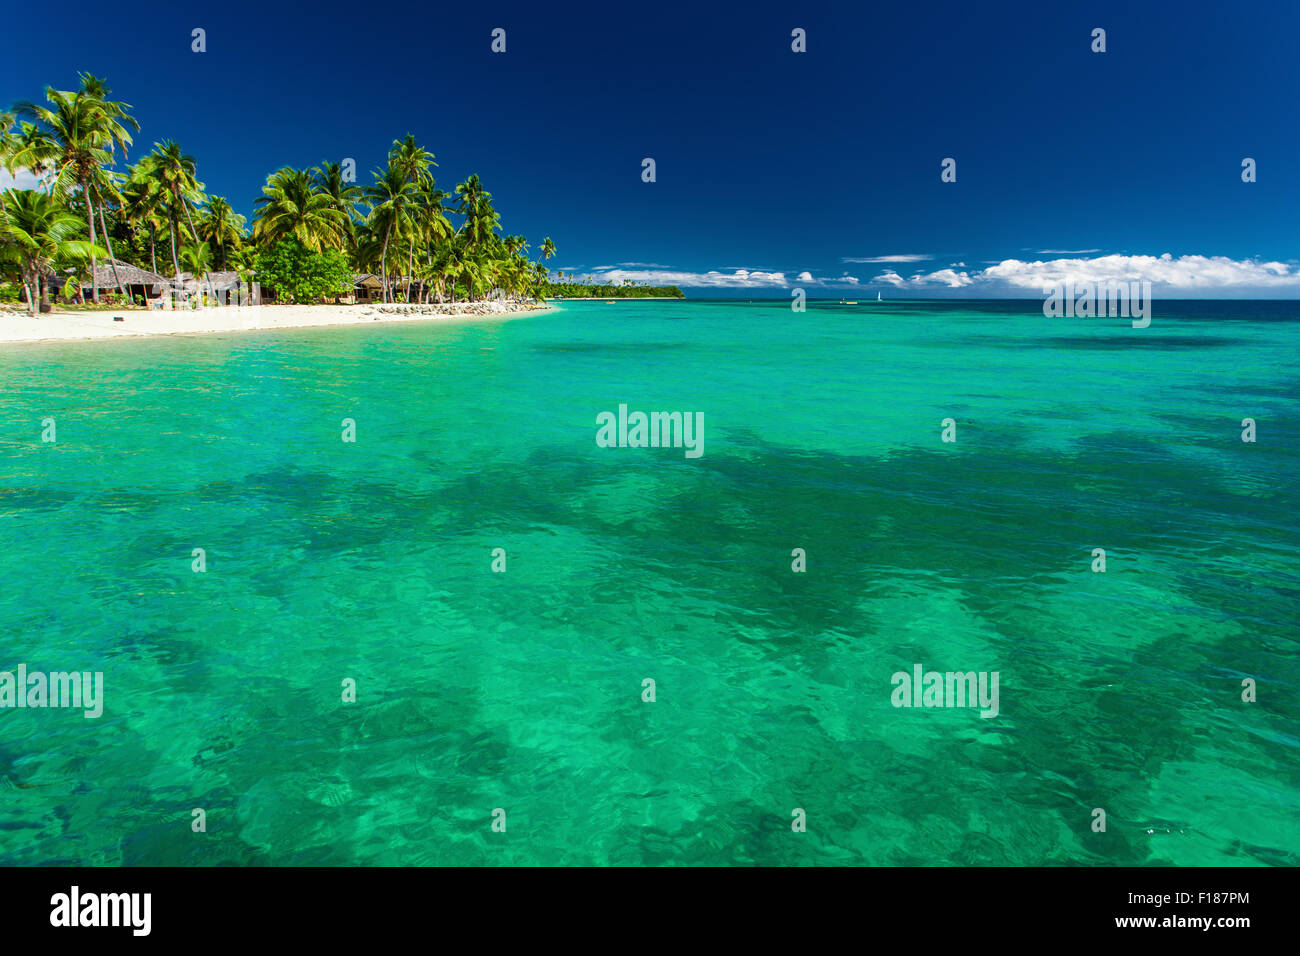 Tropical island in Fiji with sandy beach and water with coral Stock Photo